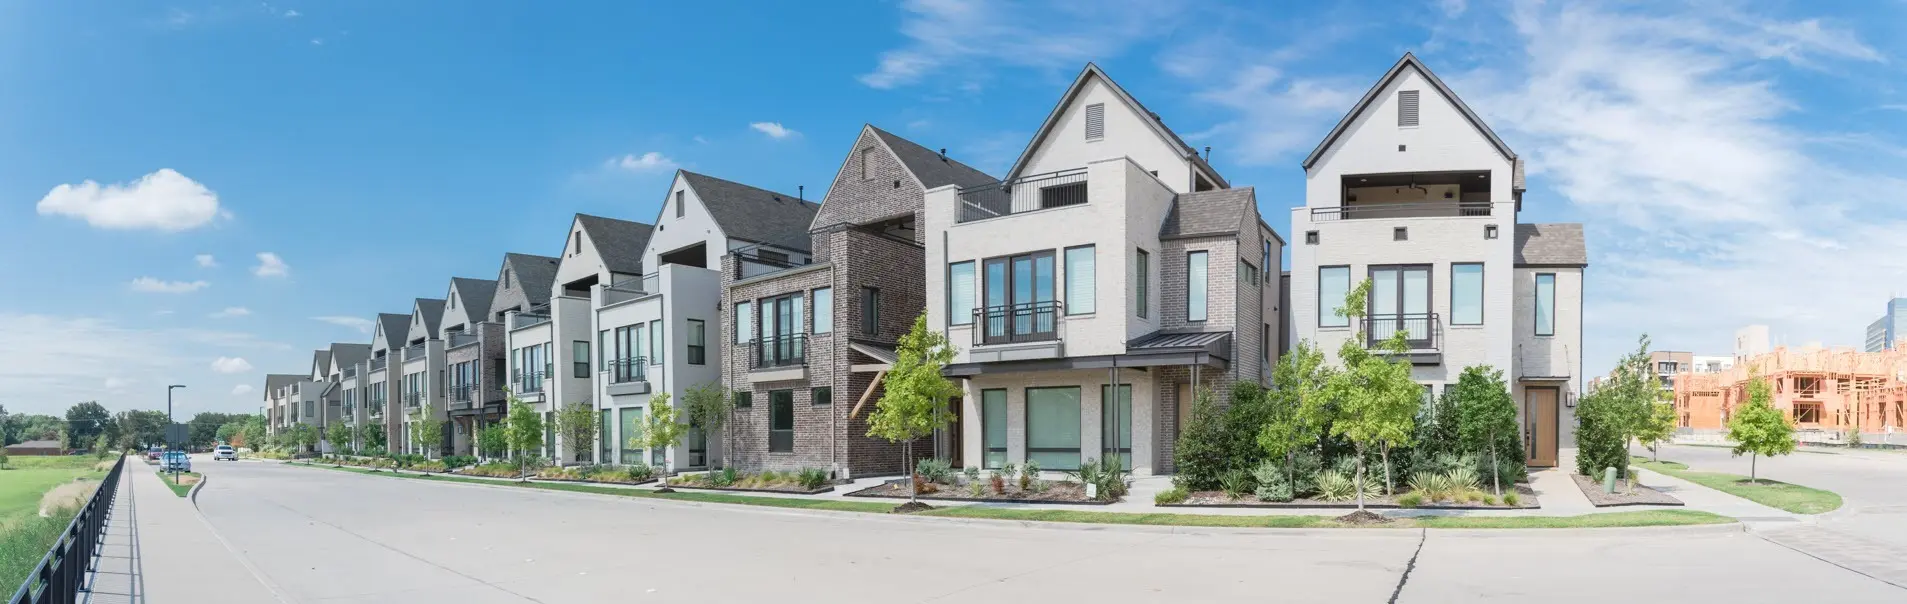 Dallas-Ft. Worth, TX Townhomes & Townhouses For Sale/Rent